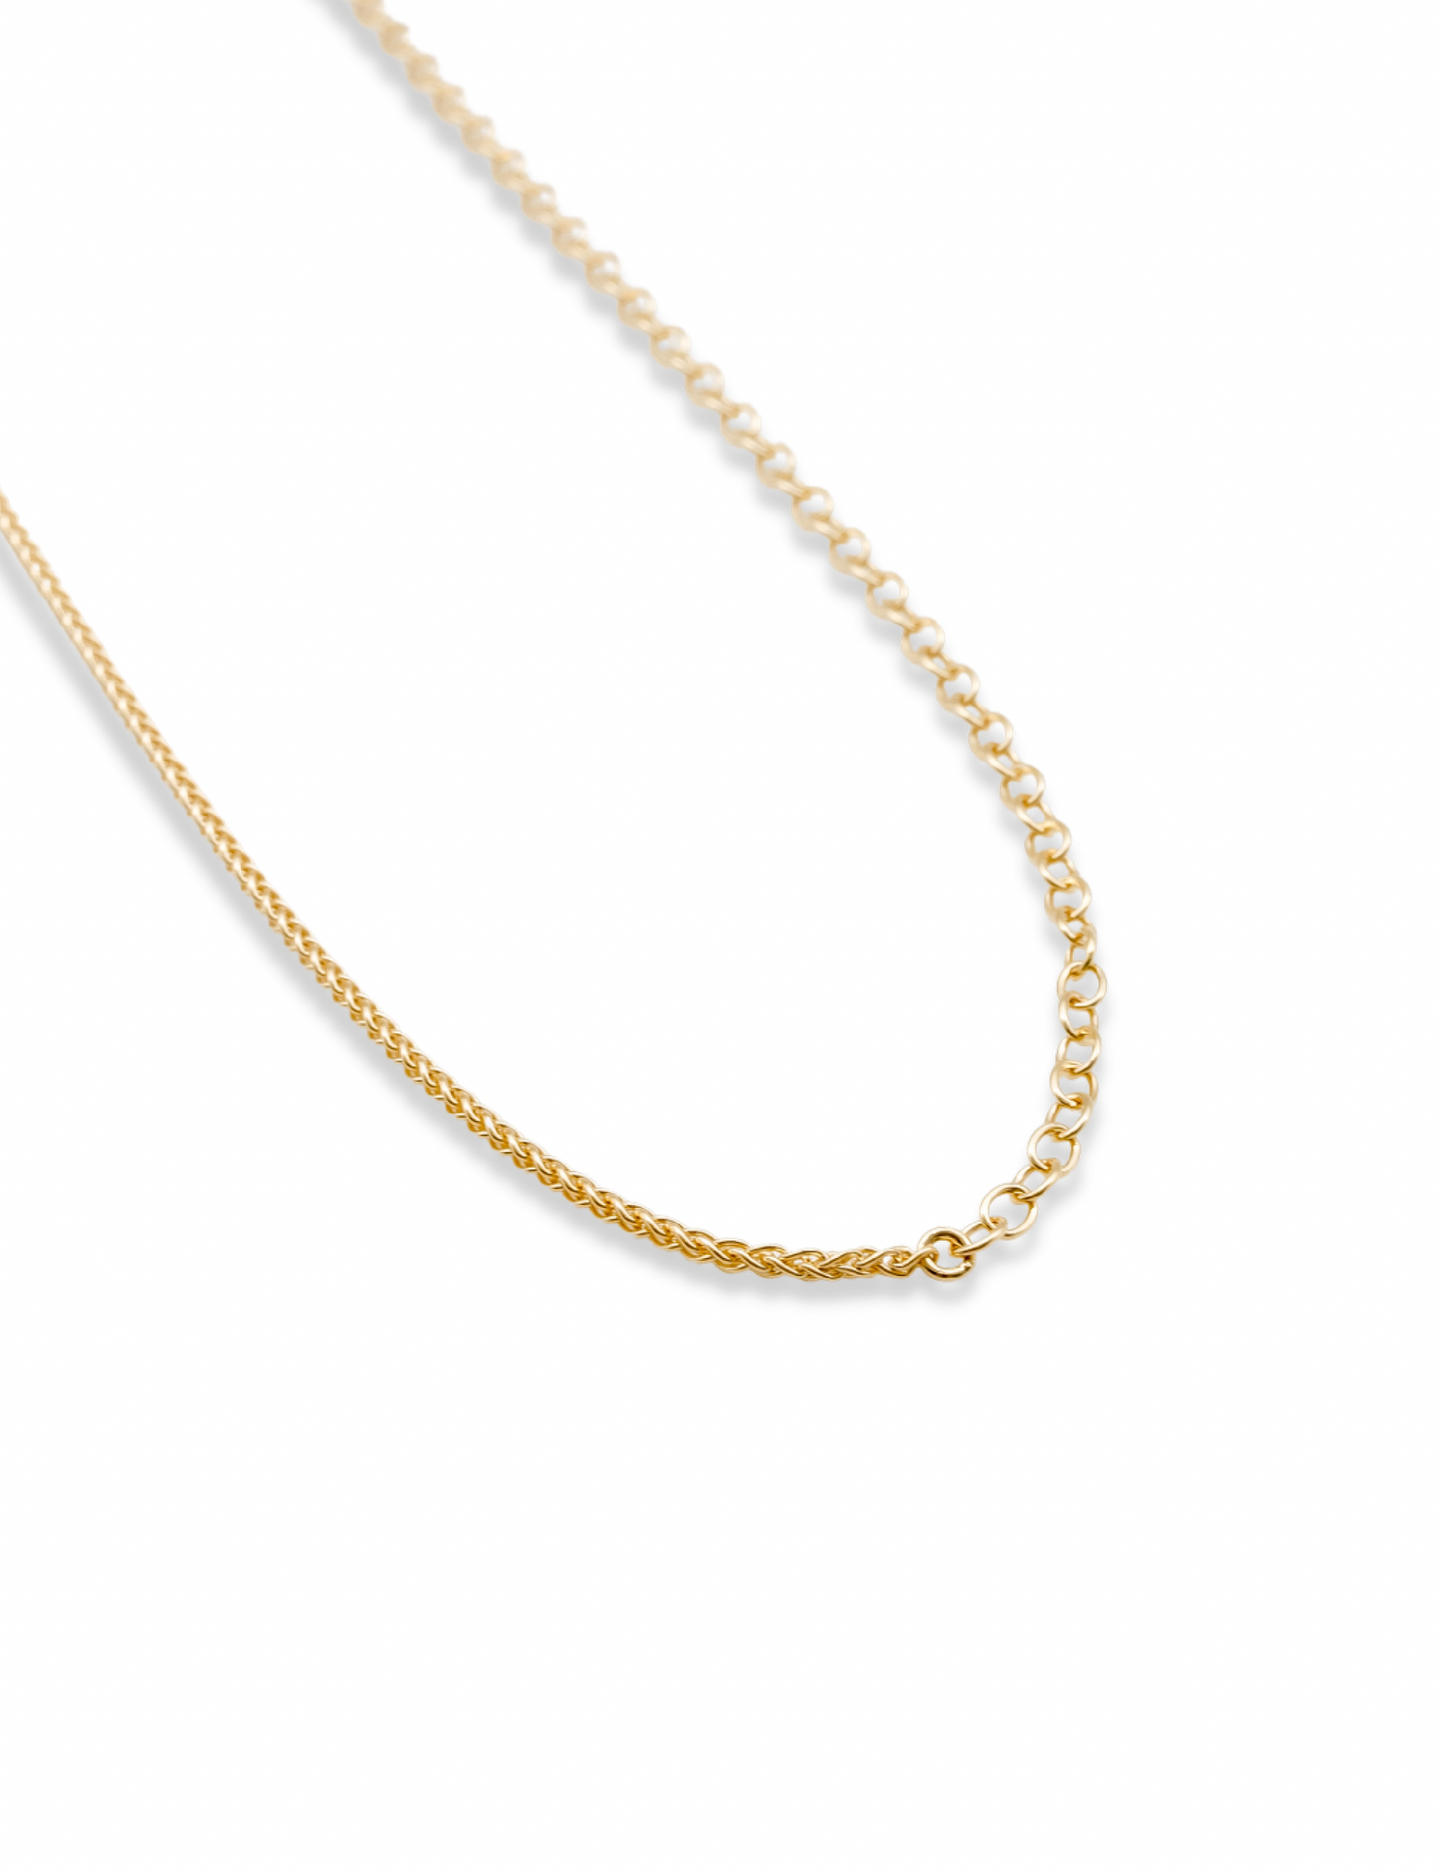 Kharys jewelry two tone double chain necklace in 18k gold vermeil